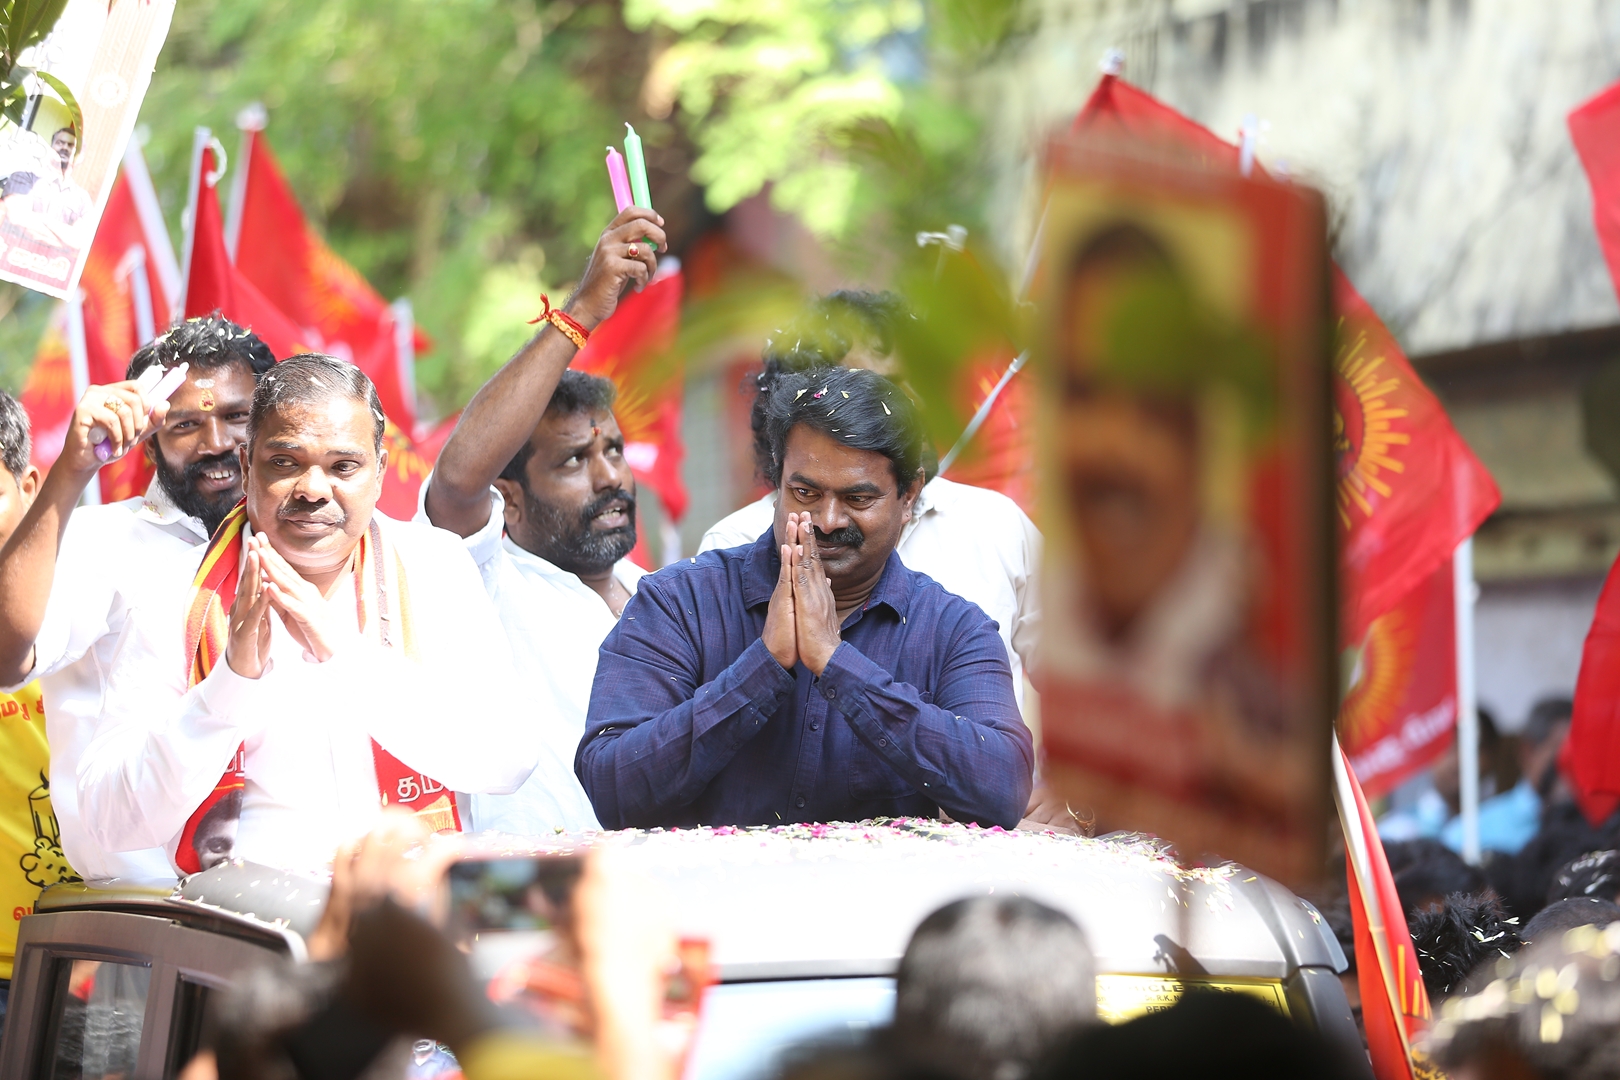 Tamil nationalist gains ground in polls, but is the surge sustainable?